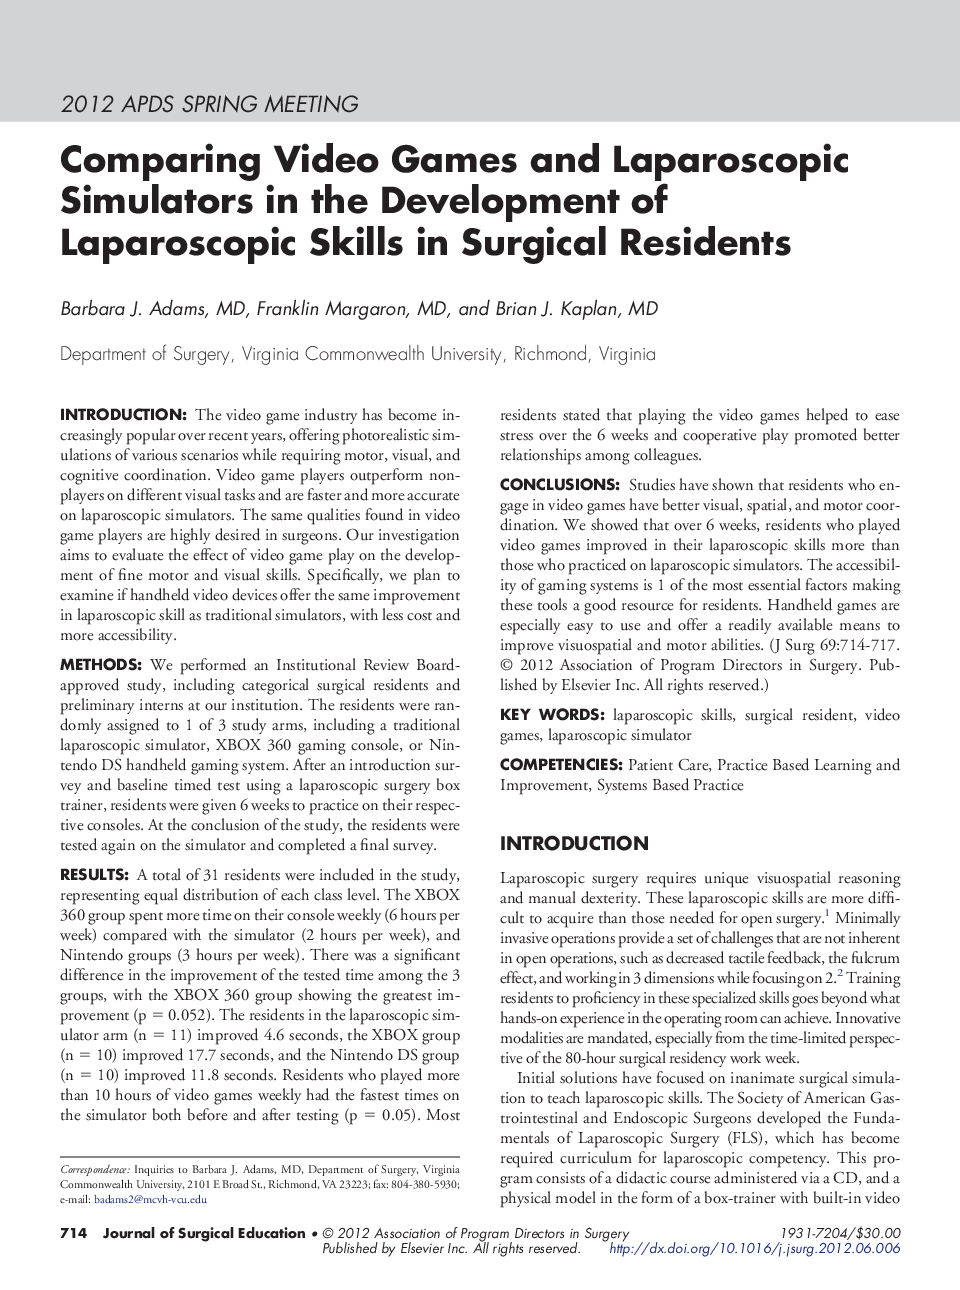 Comparing Video Games and Laparoscopic Simulators in the Development of Laparoscopic Skills in Surgical Residents